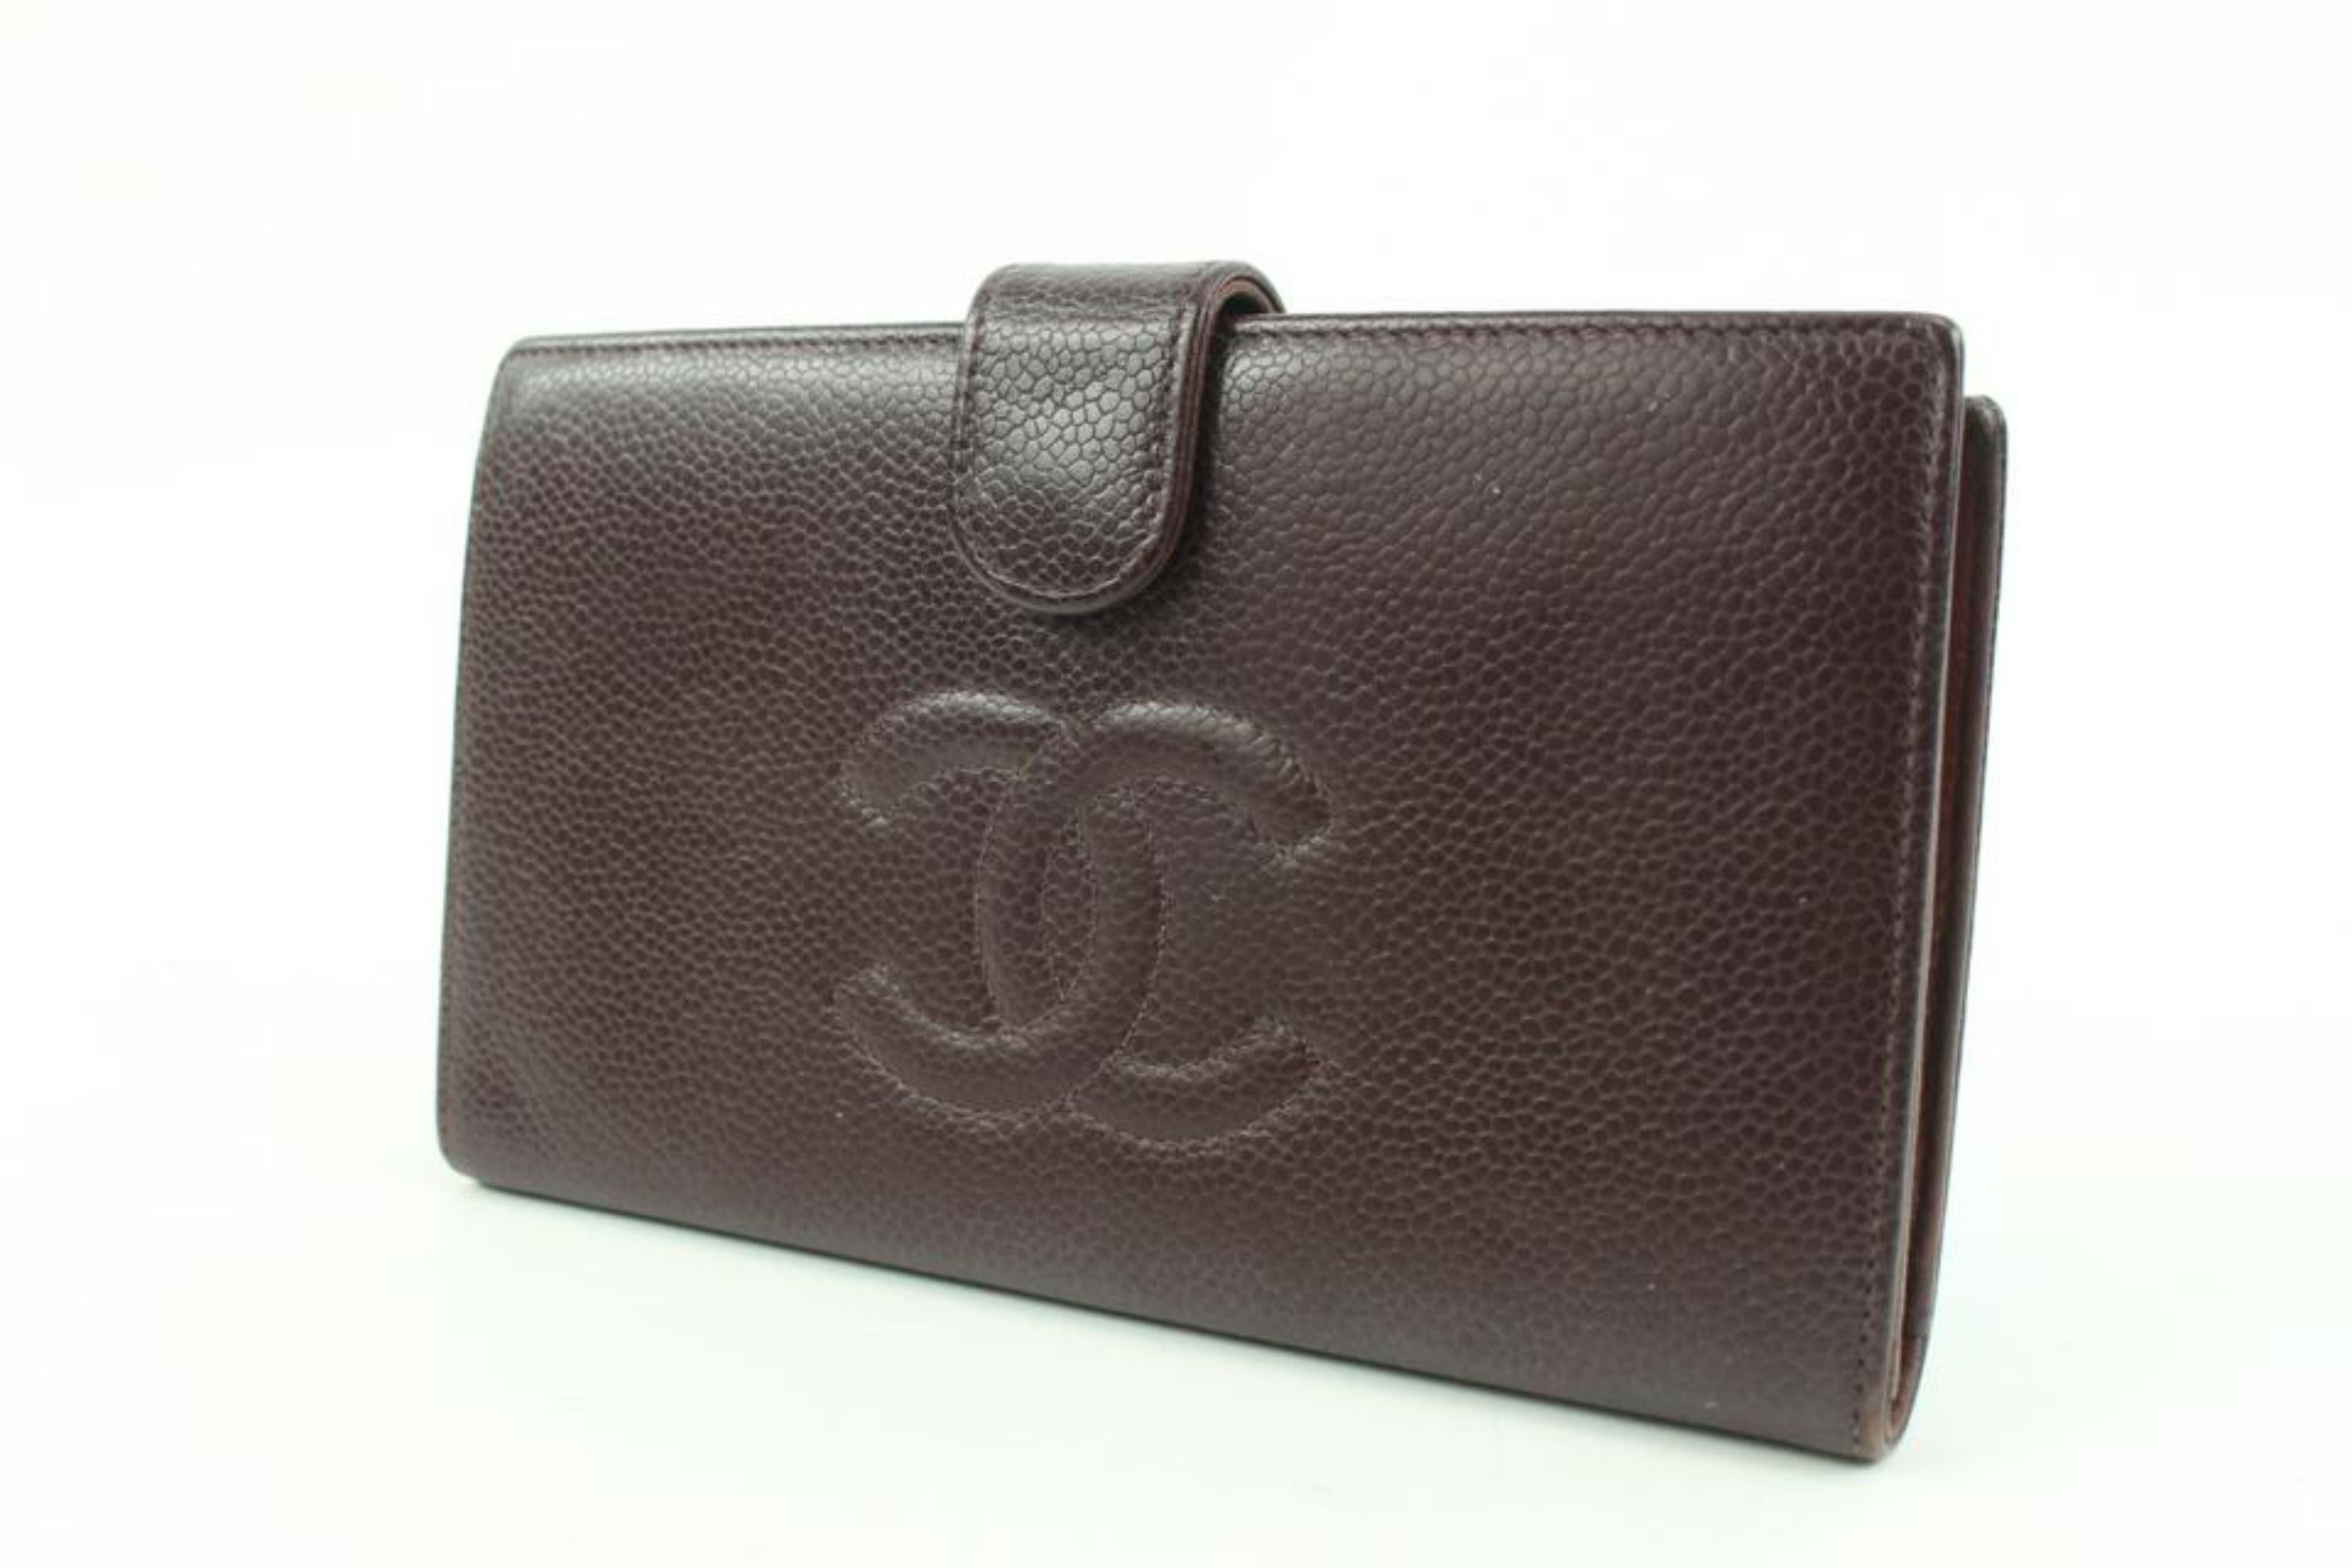 Chanel Bordeaux Caviar Leather CC Logo Long Bifold Flap Wallet 42ck224s
Date Code/Serial Number: 5759592
Made In: France
Measurements: Length:  6.75